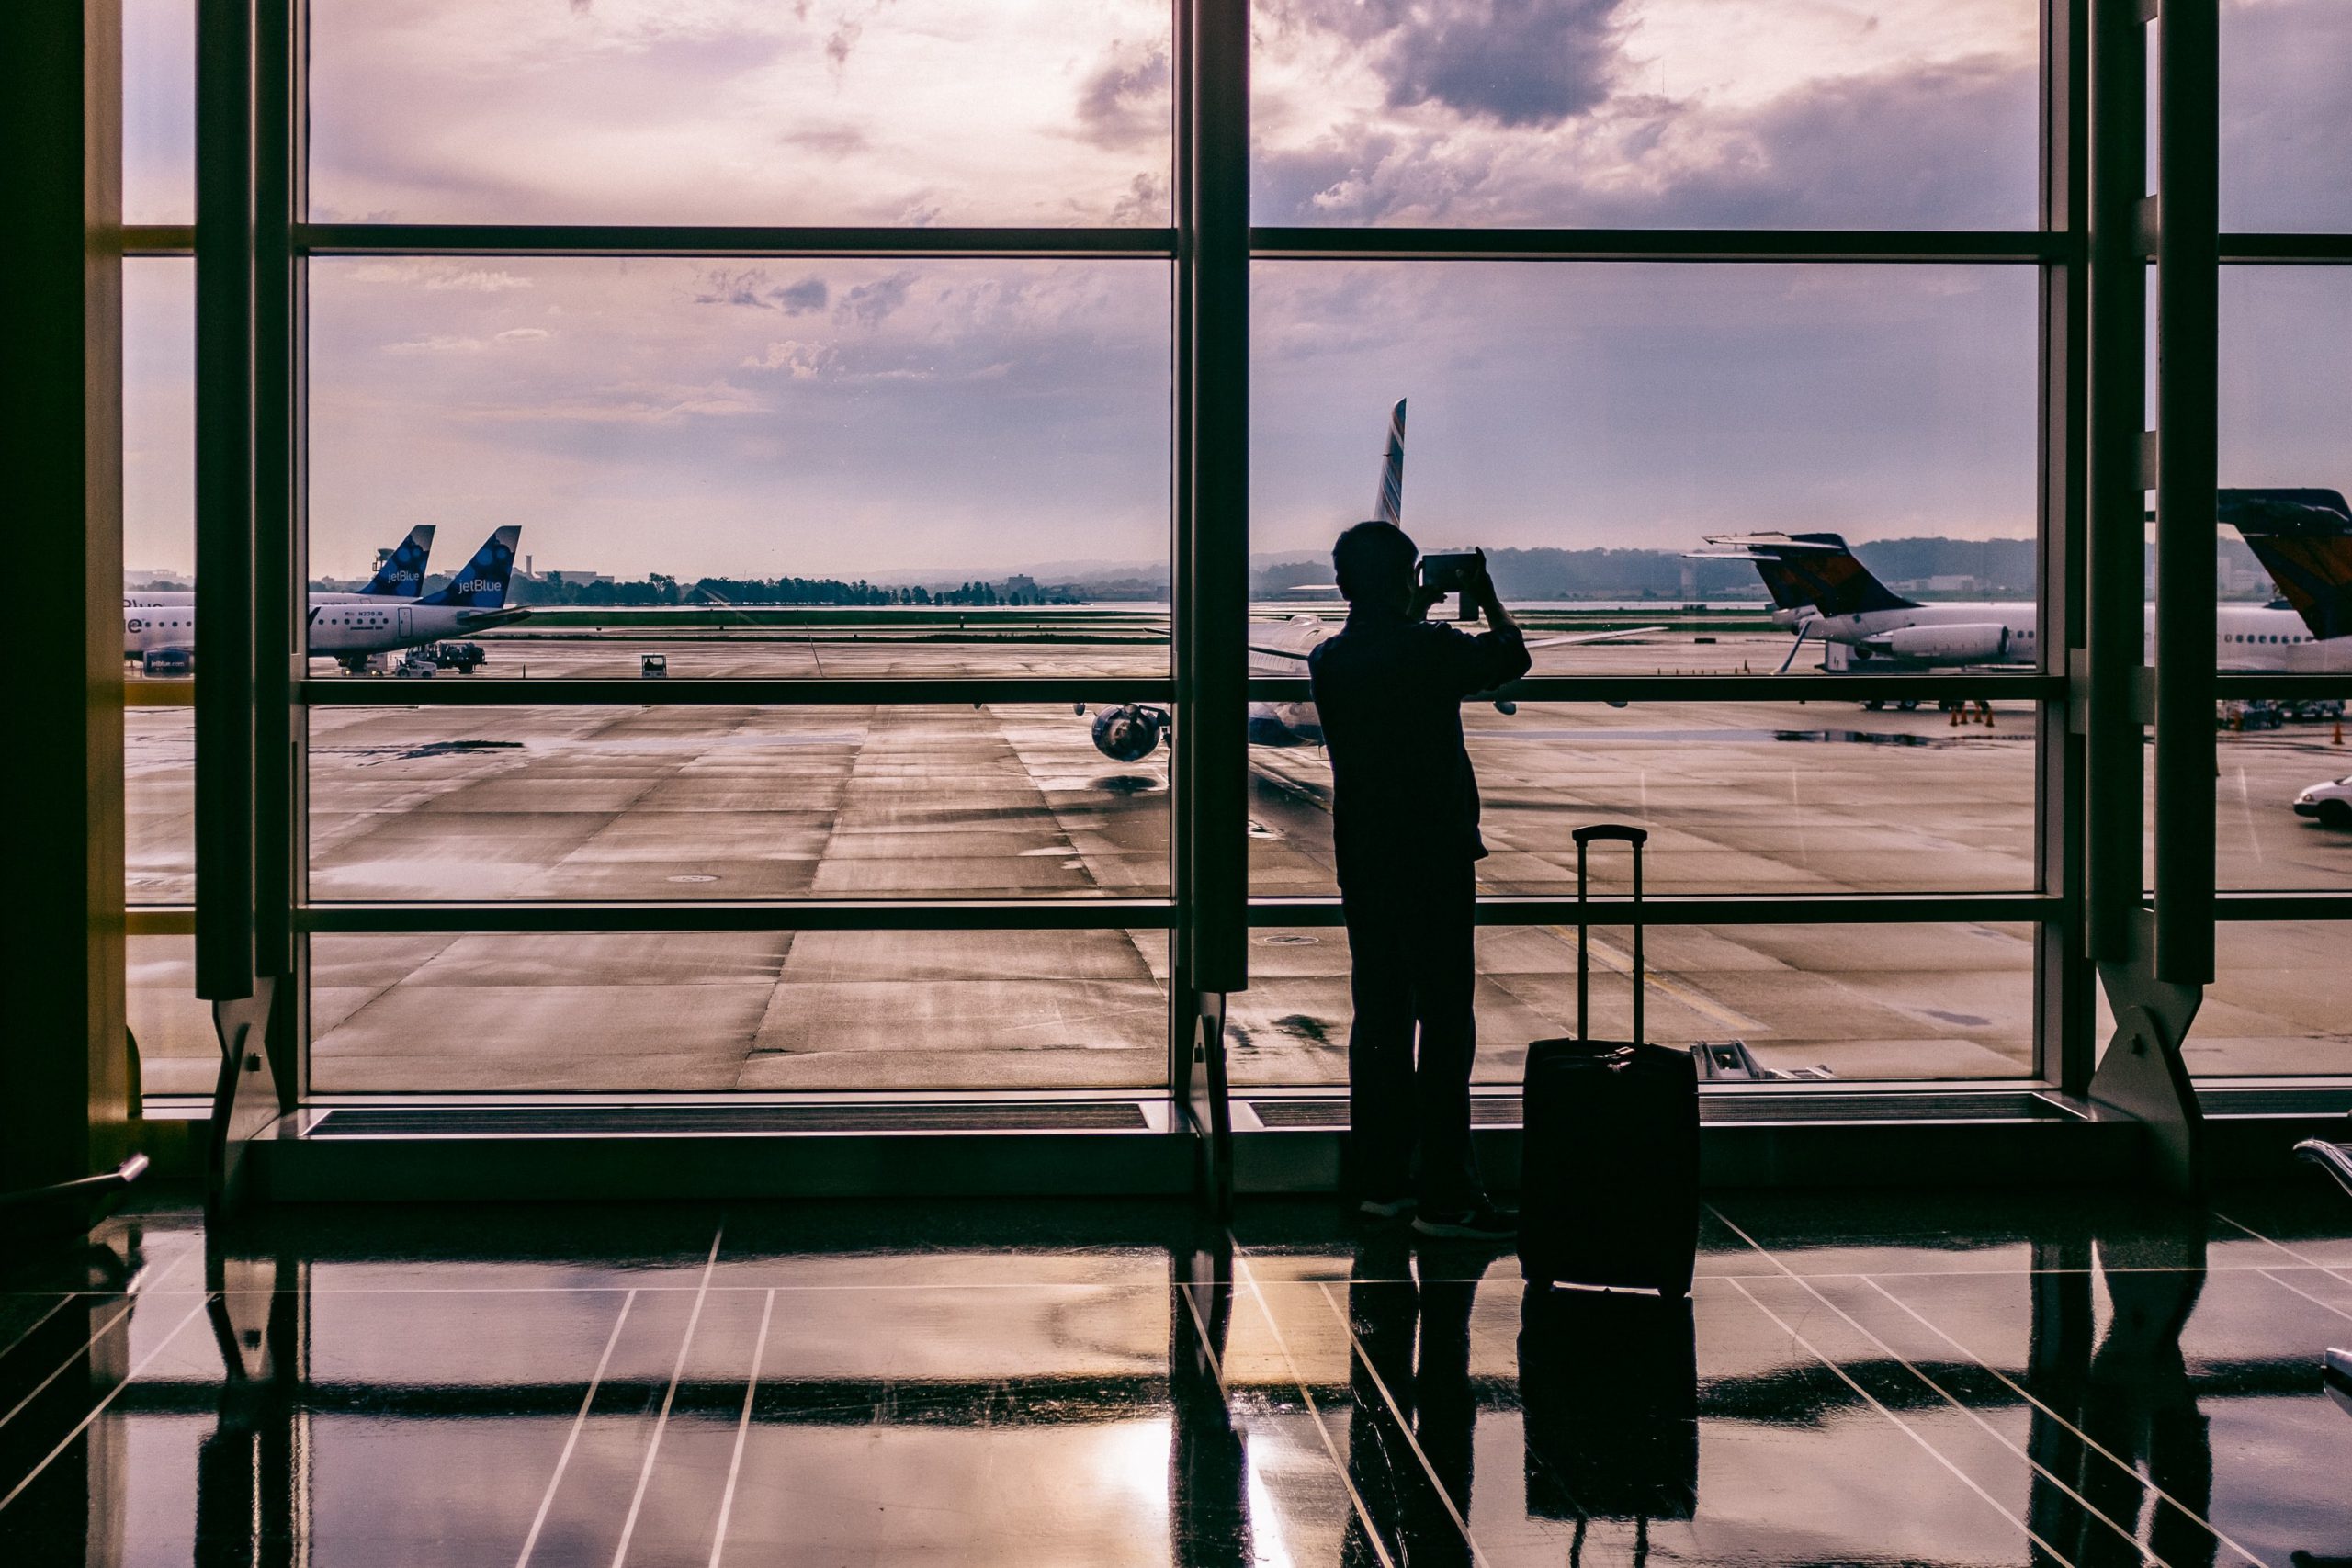 Image of a person silhouetted with suitcases in an airport terminal window